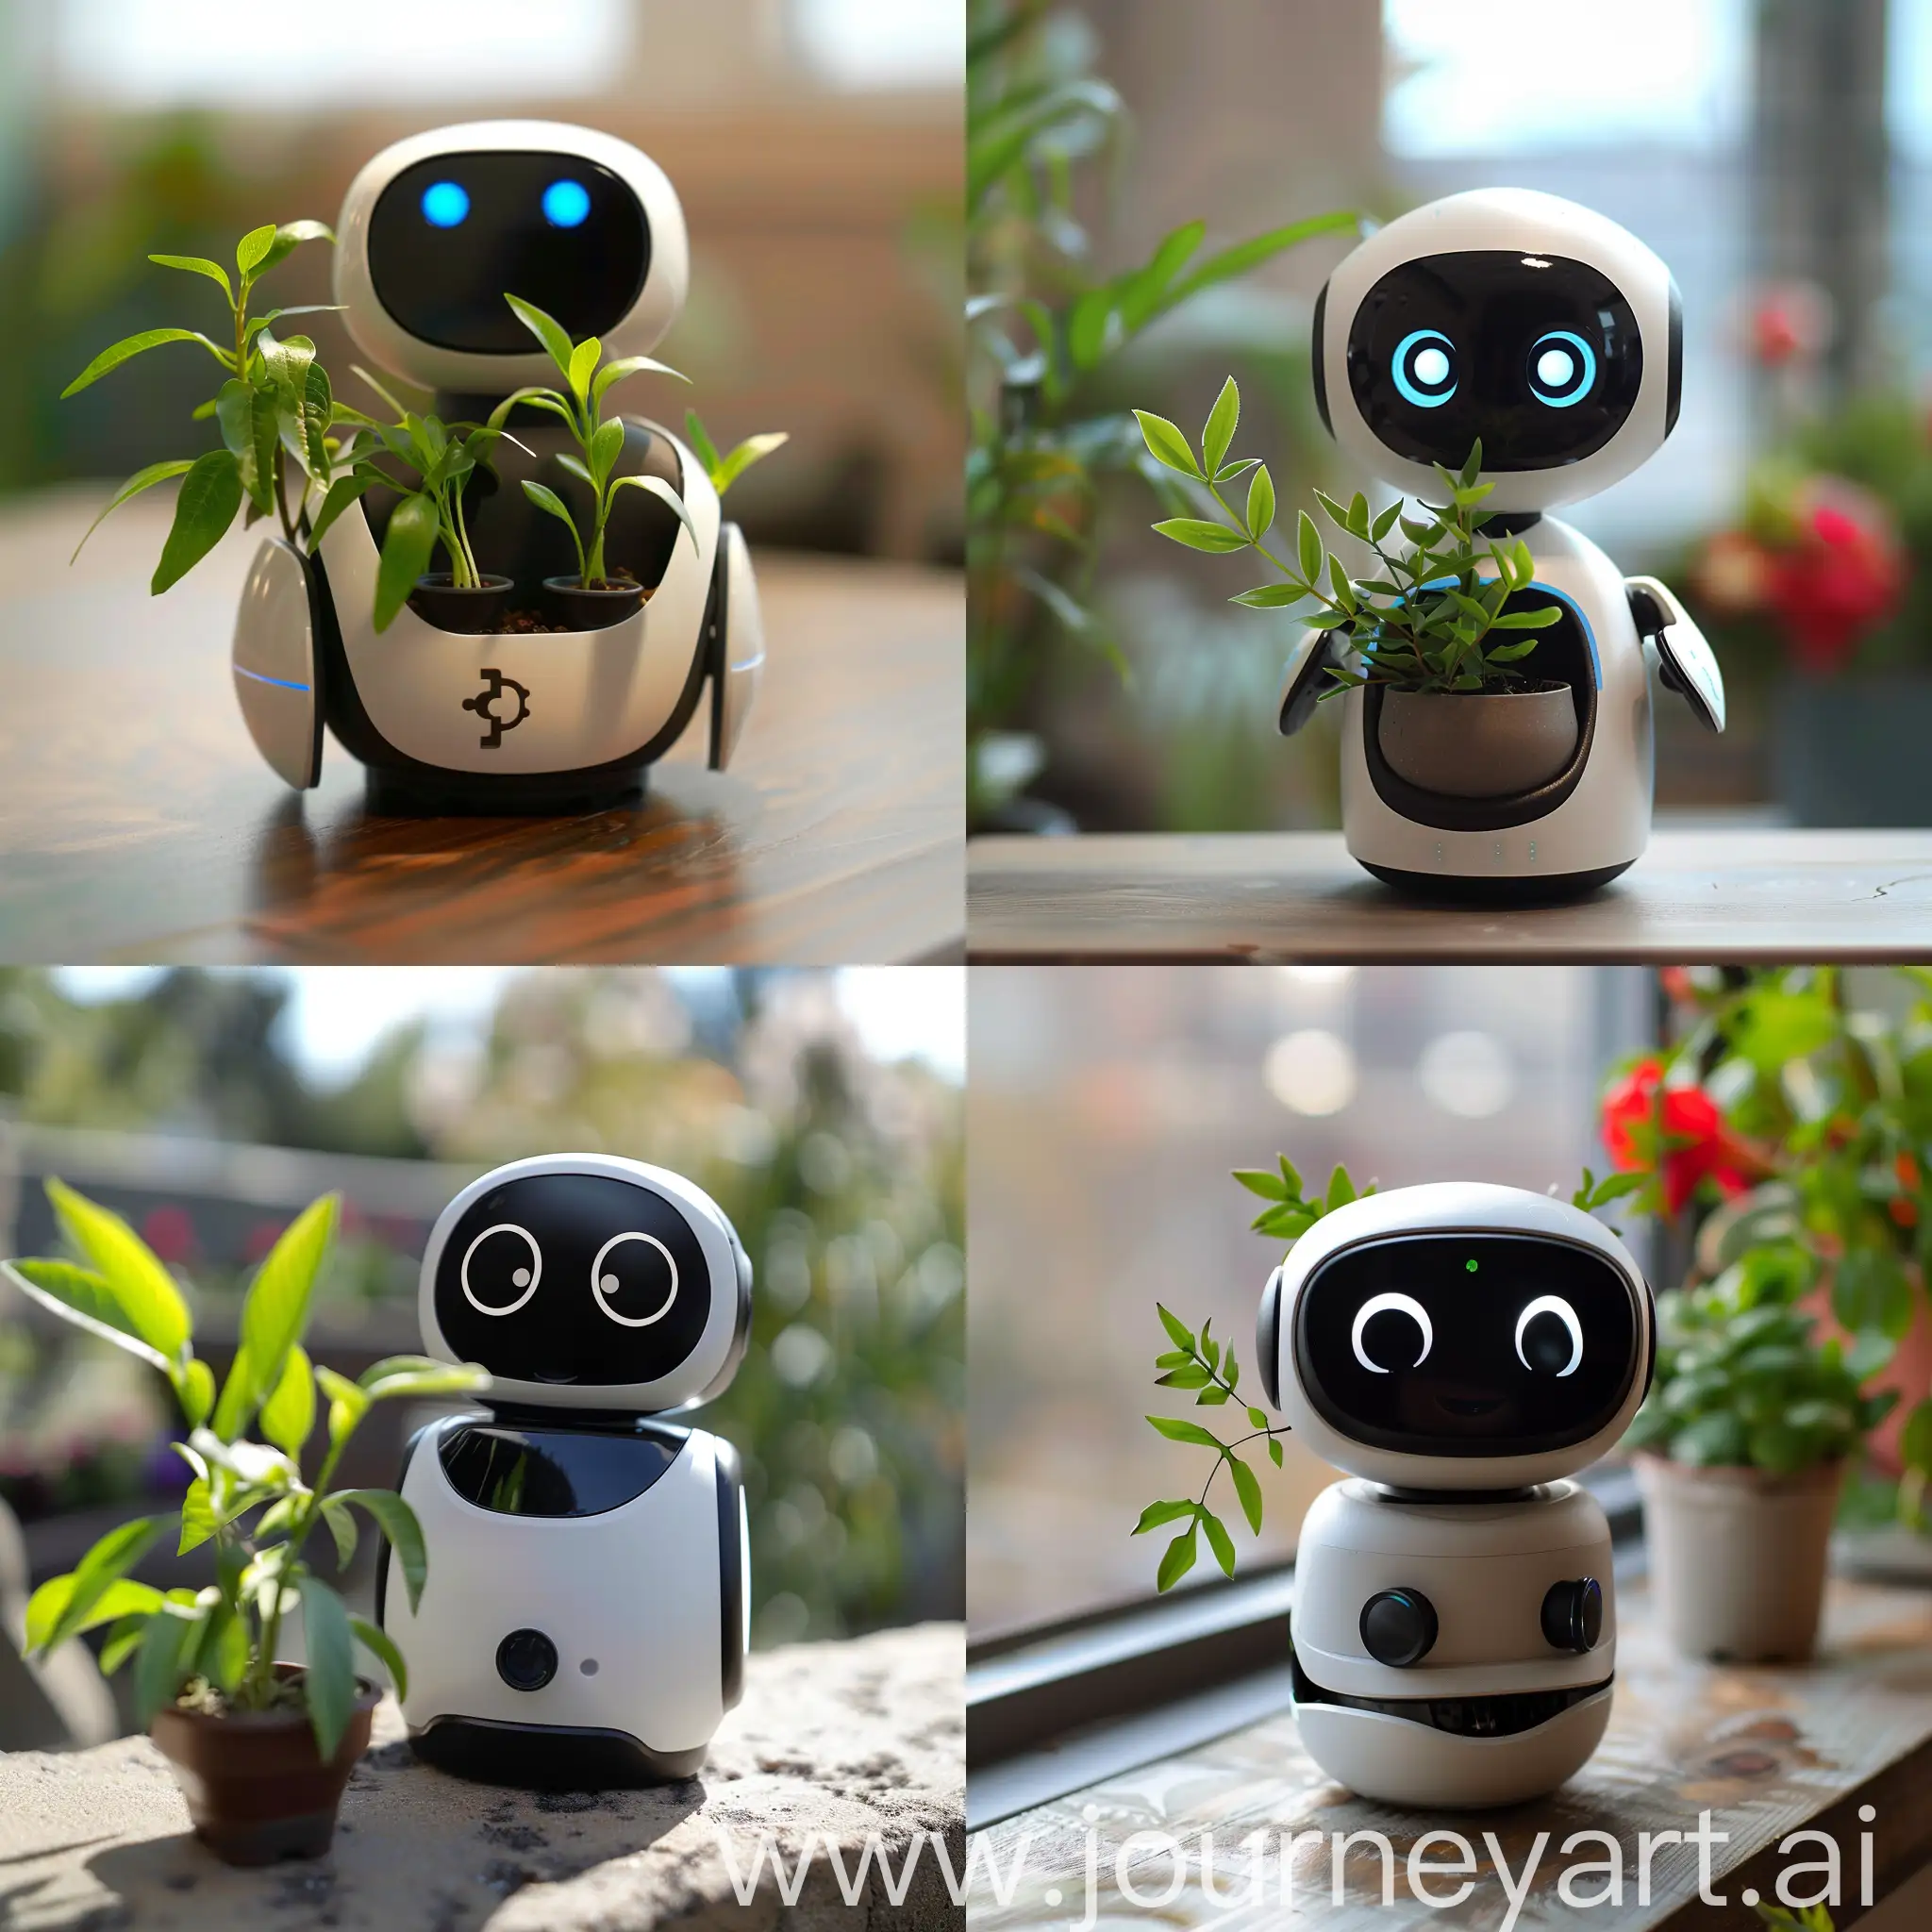 Smart-Planter-Inspired-by-Cozmo-Robot-Futuristic-AI-Gardening-Technology